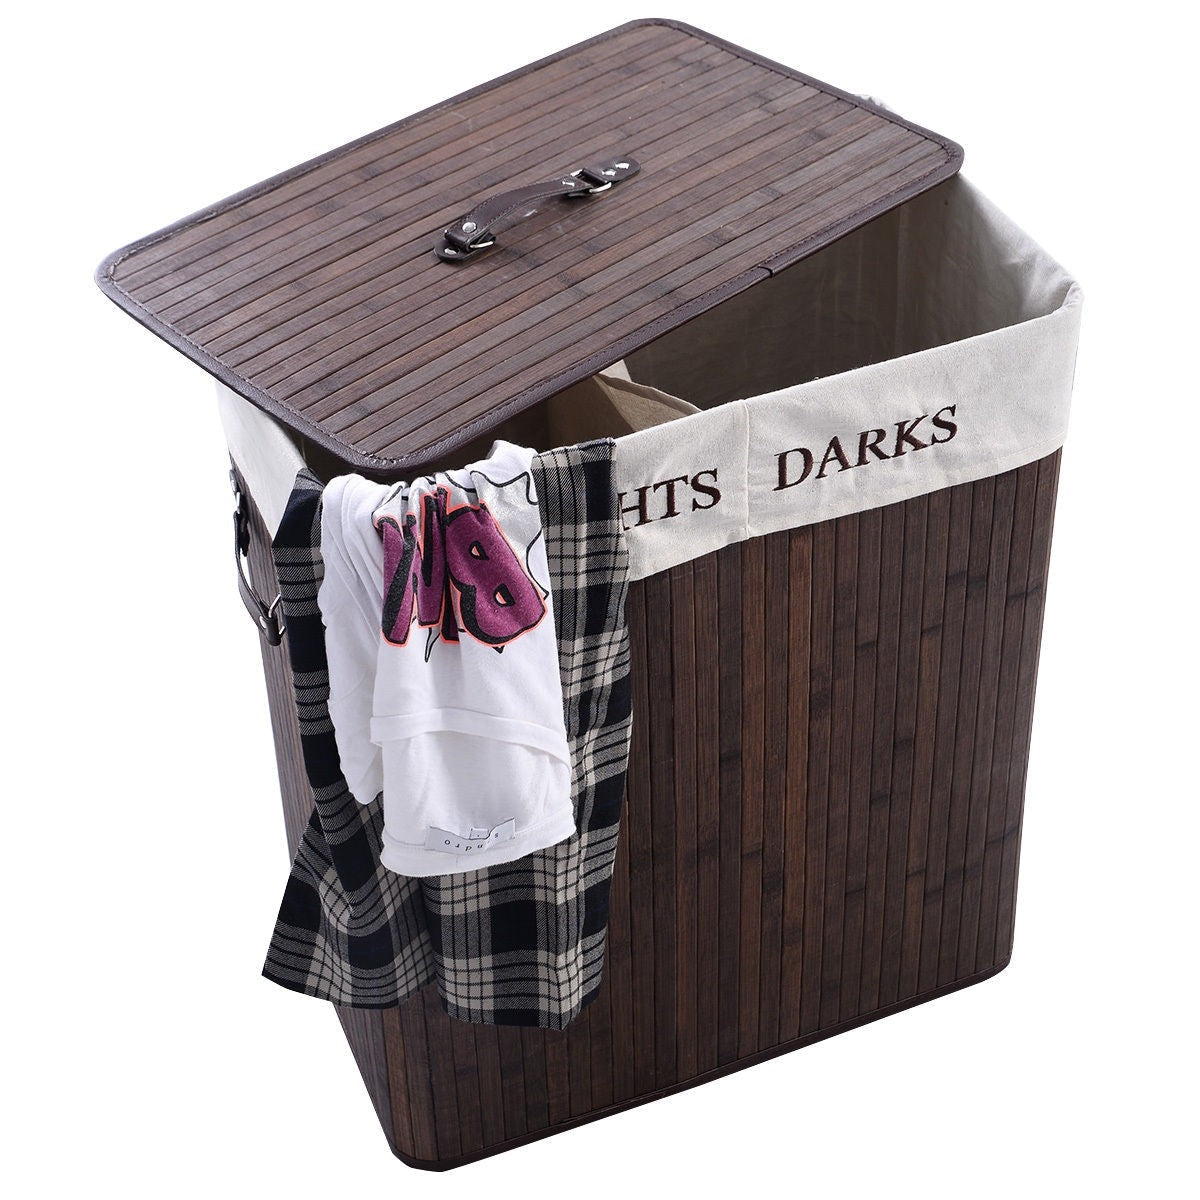 Bathroom > Laundry Hampers - Folding 2-Bin Brown Bamboo Laundry Hamper With Handles